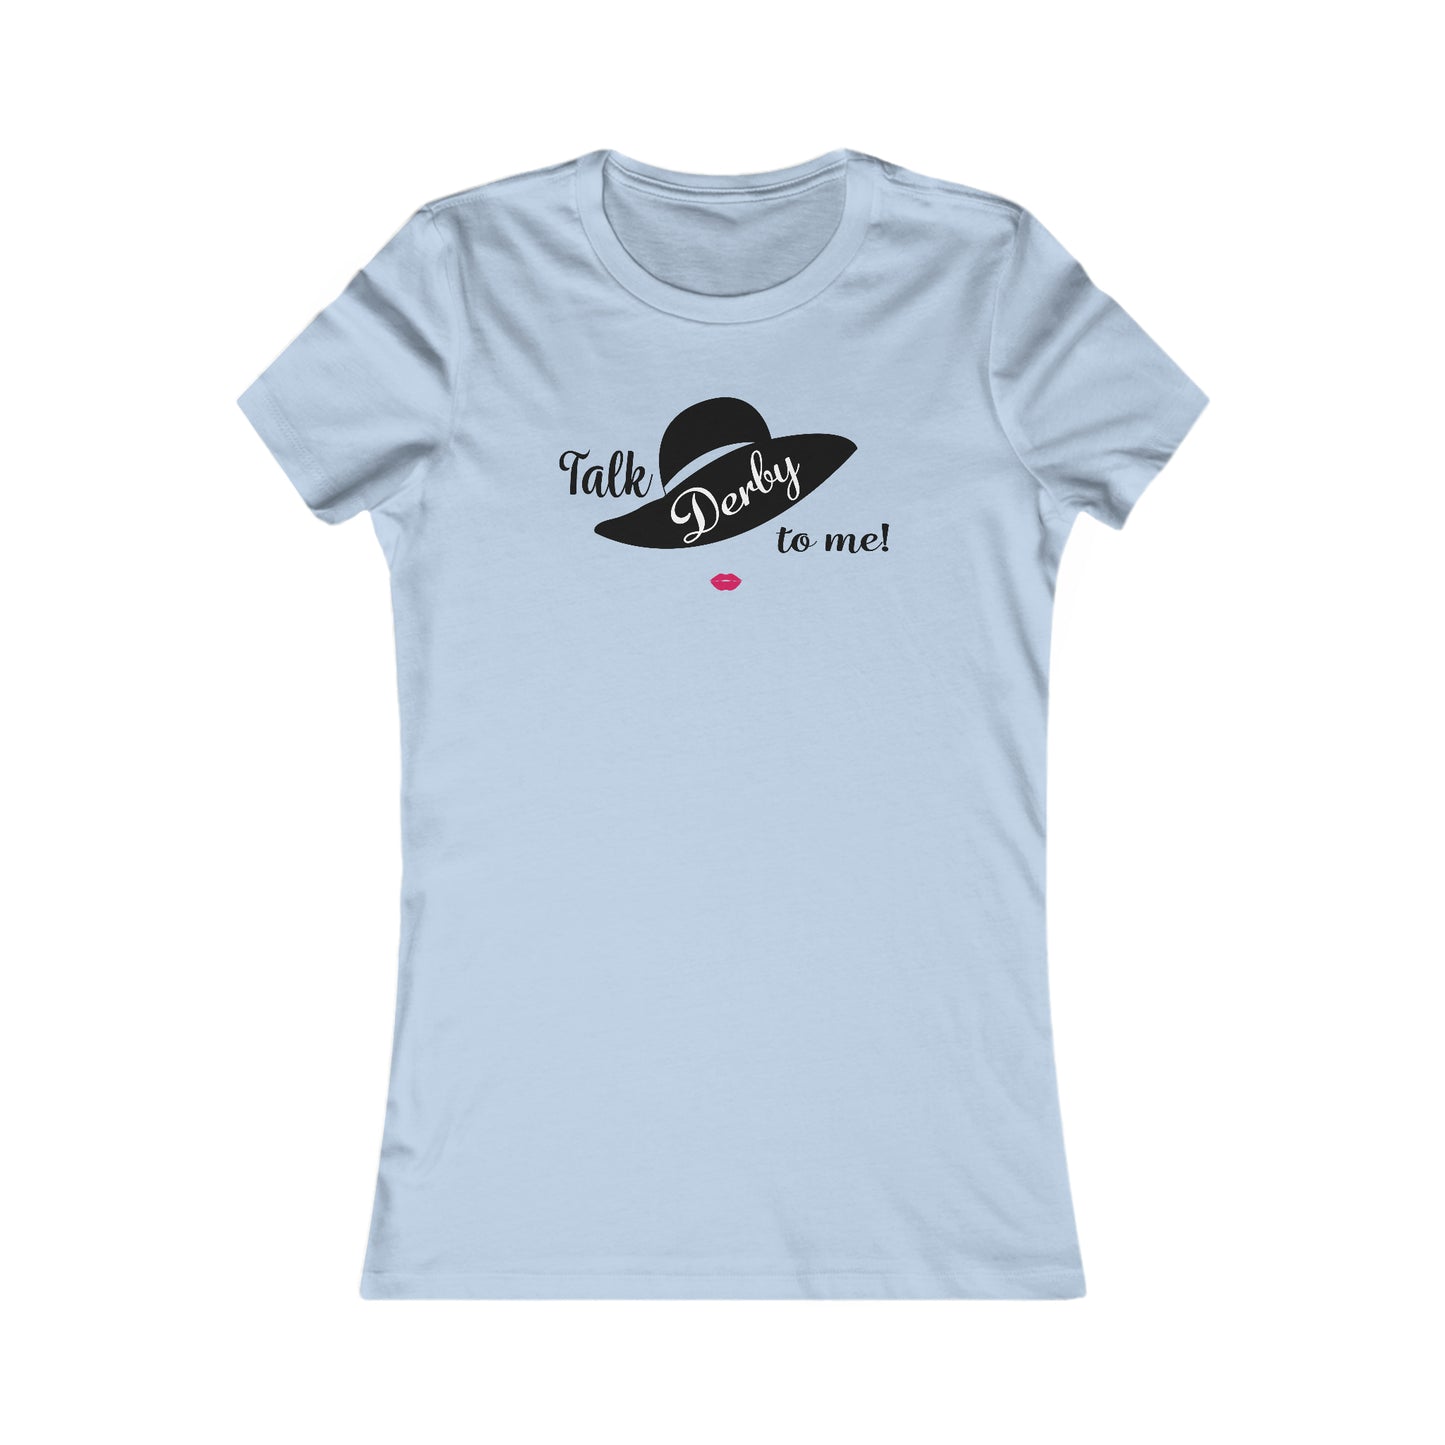 Talk Derby To Me T-Shirt For Derby Day T Shirt For Kentucky Derby TShirt